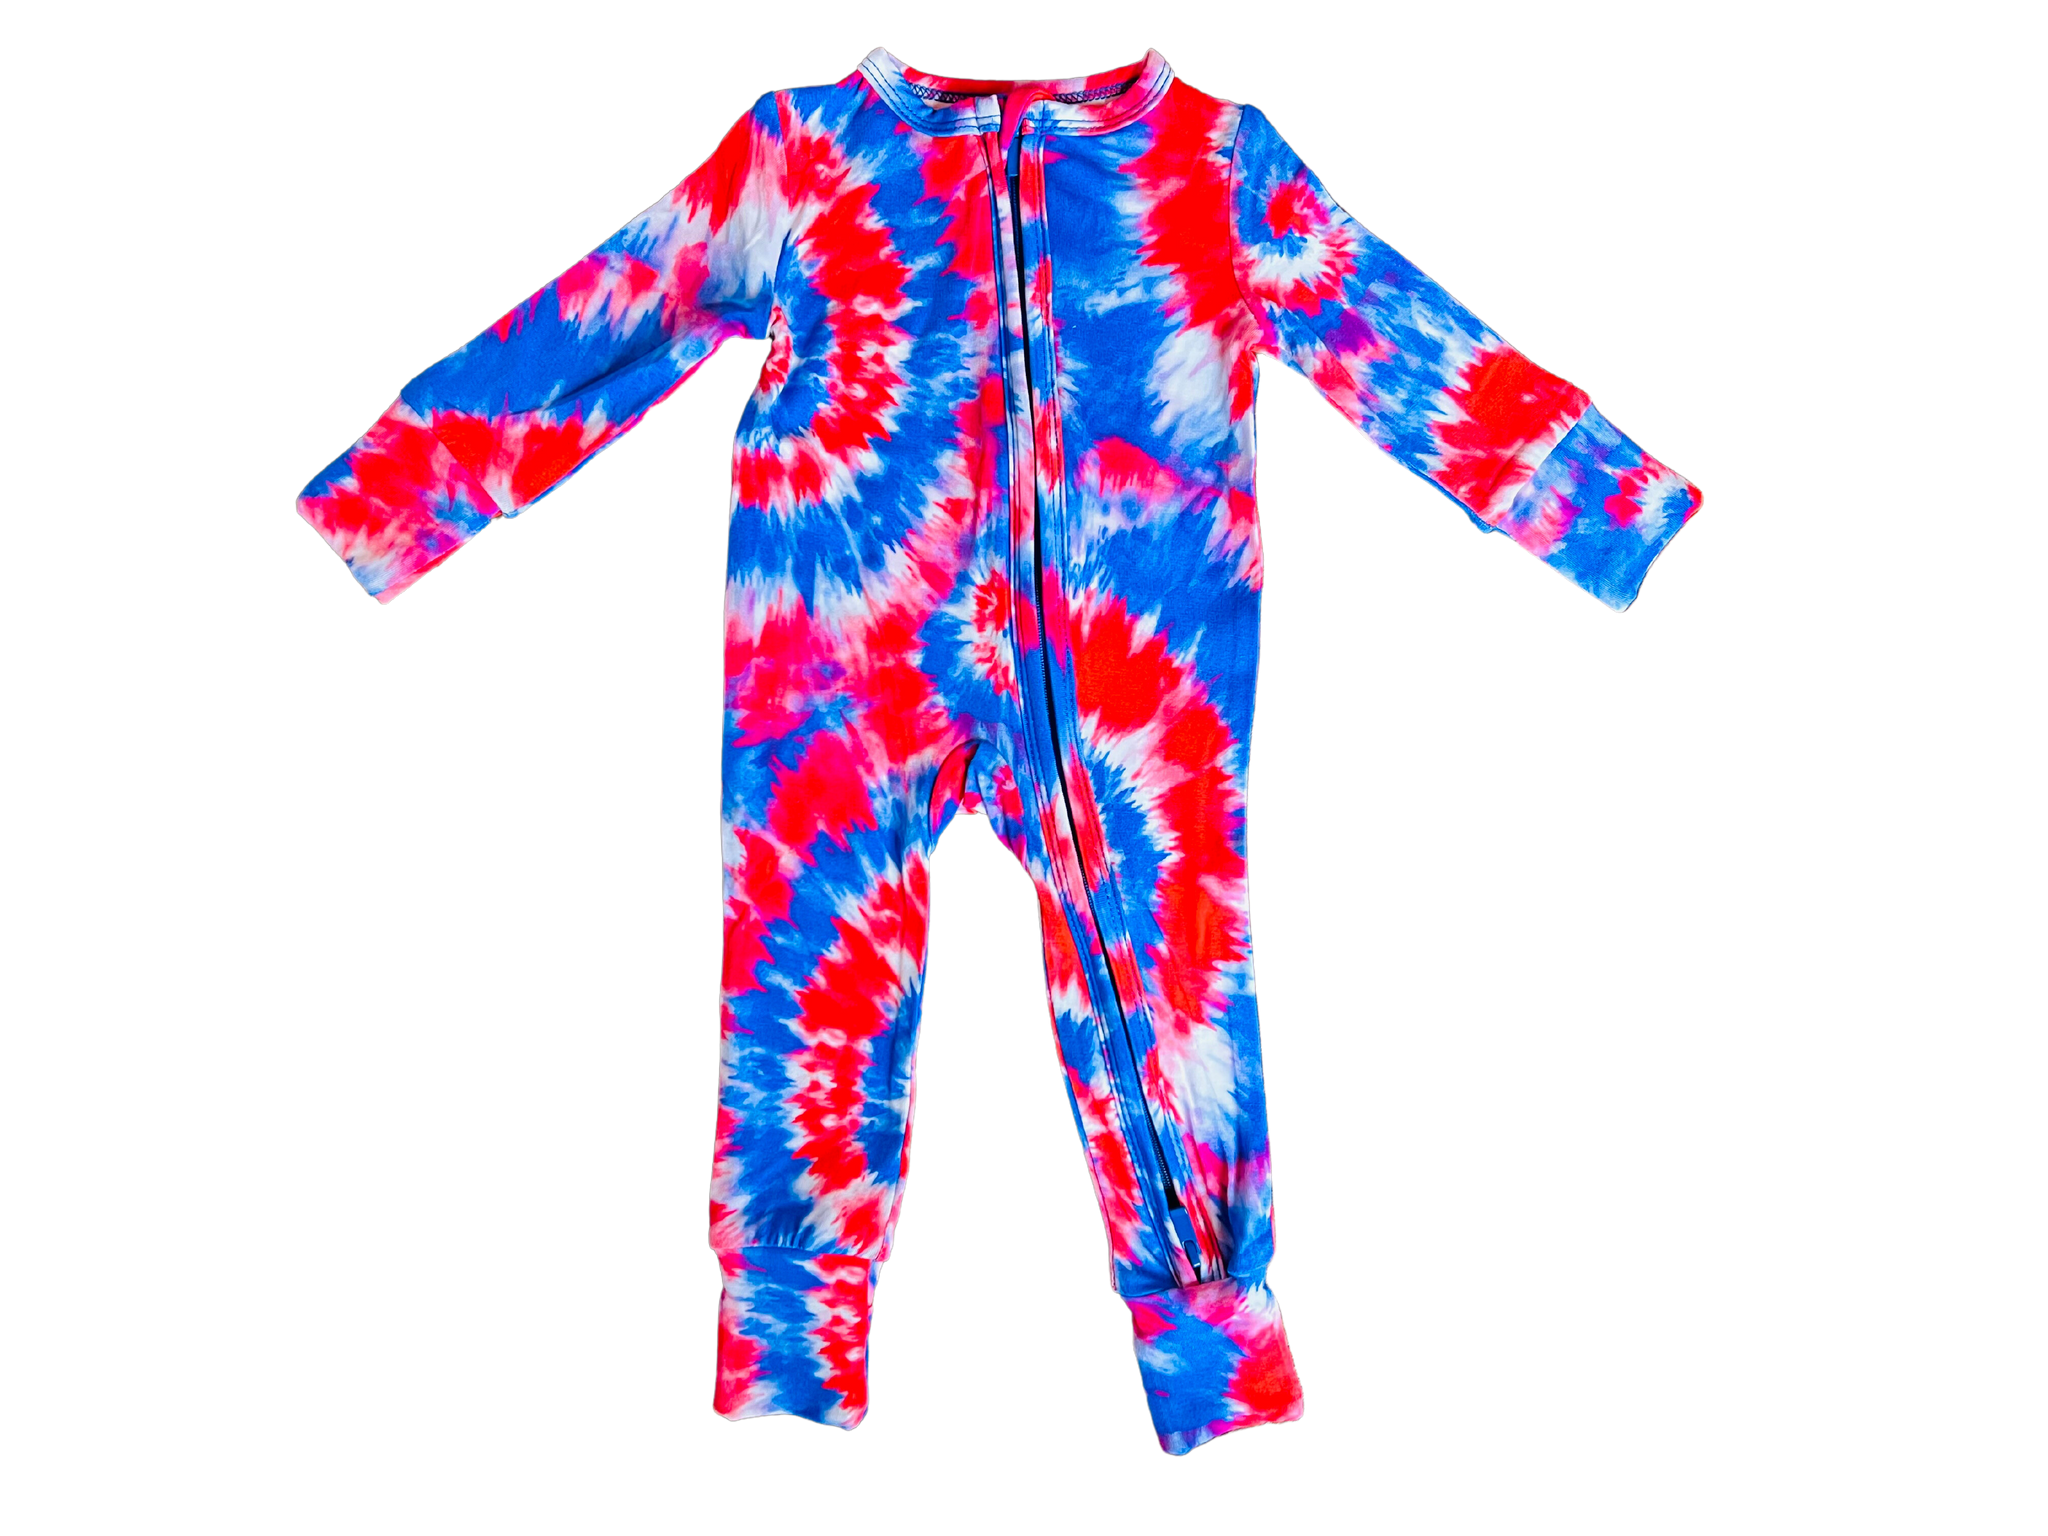 Red, White and Blue Tie-Dye One-Piece Bamboo Viscose Footie/Romper